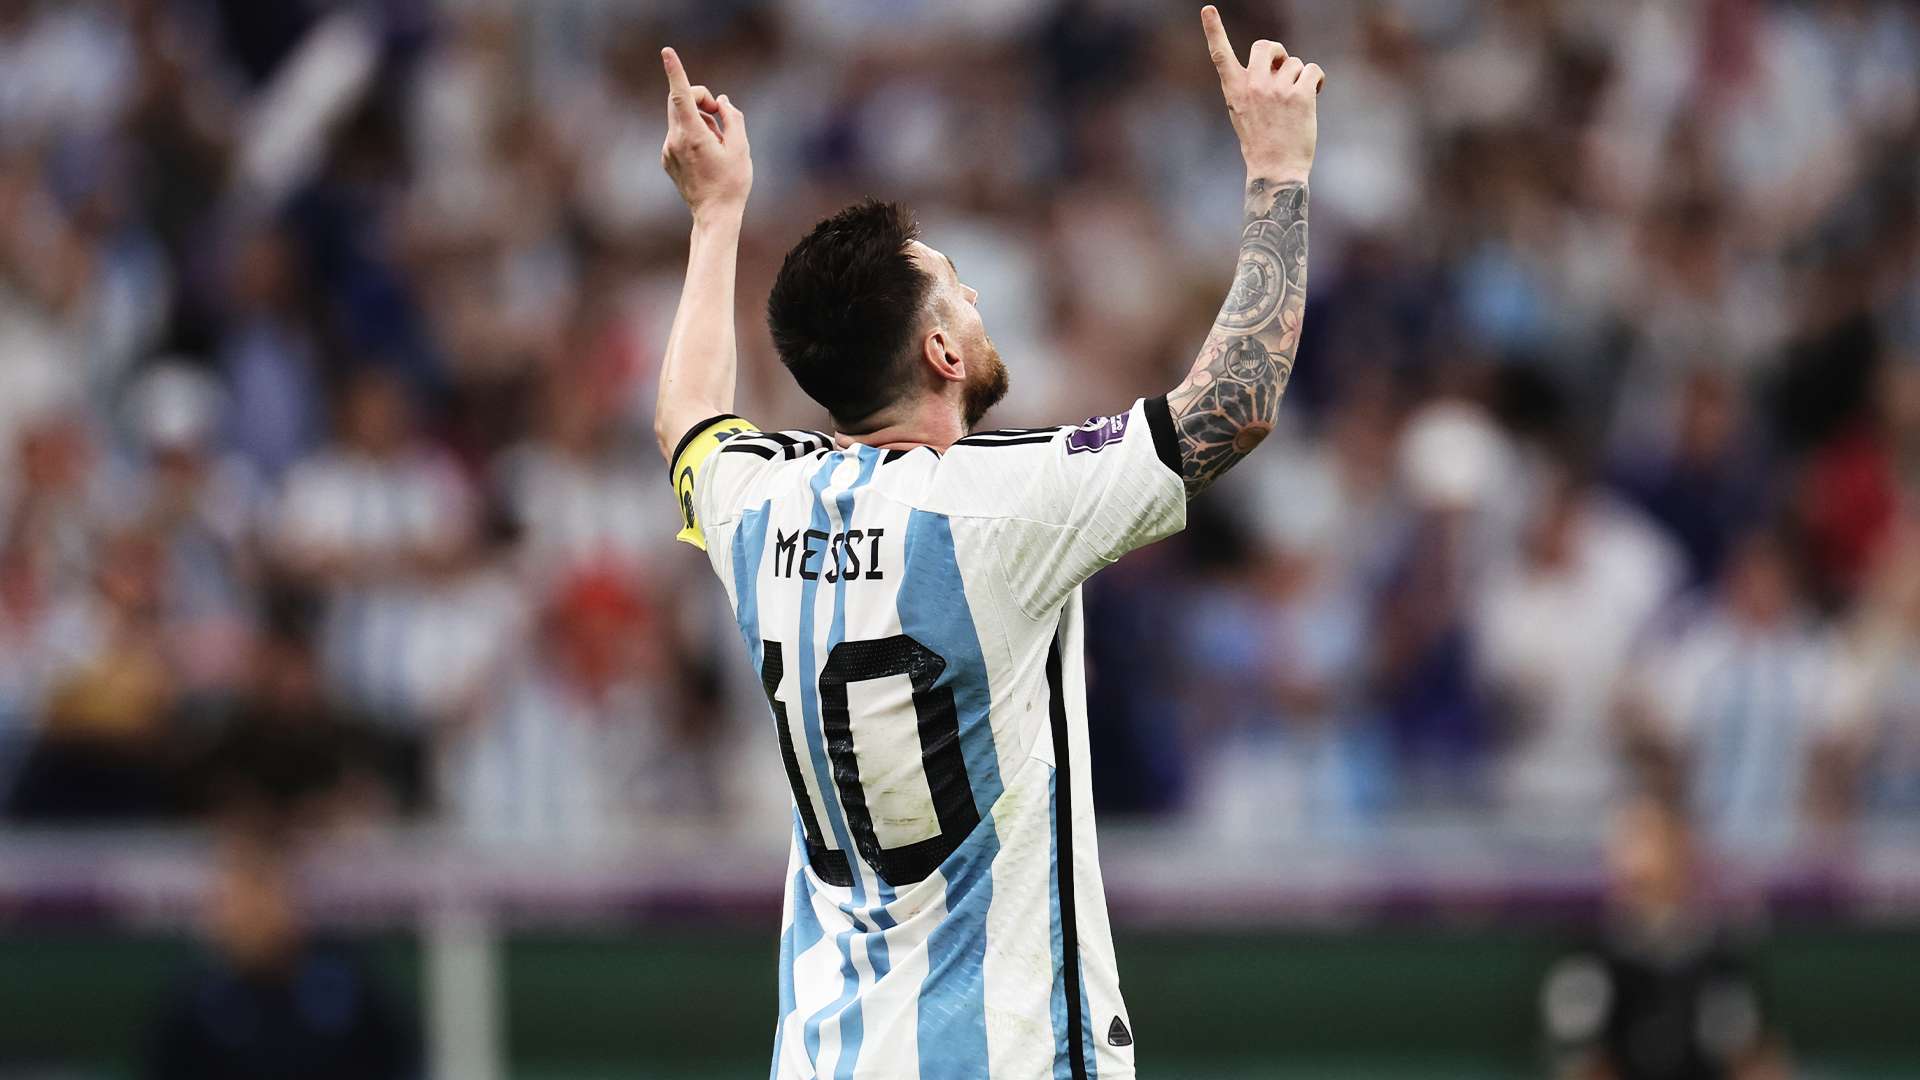 Messi - Final World Cup kit 